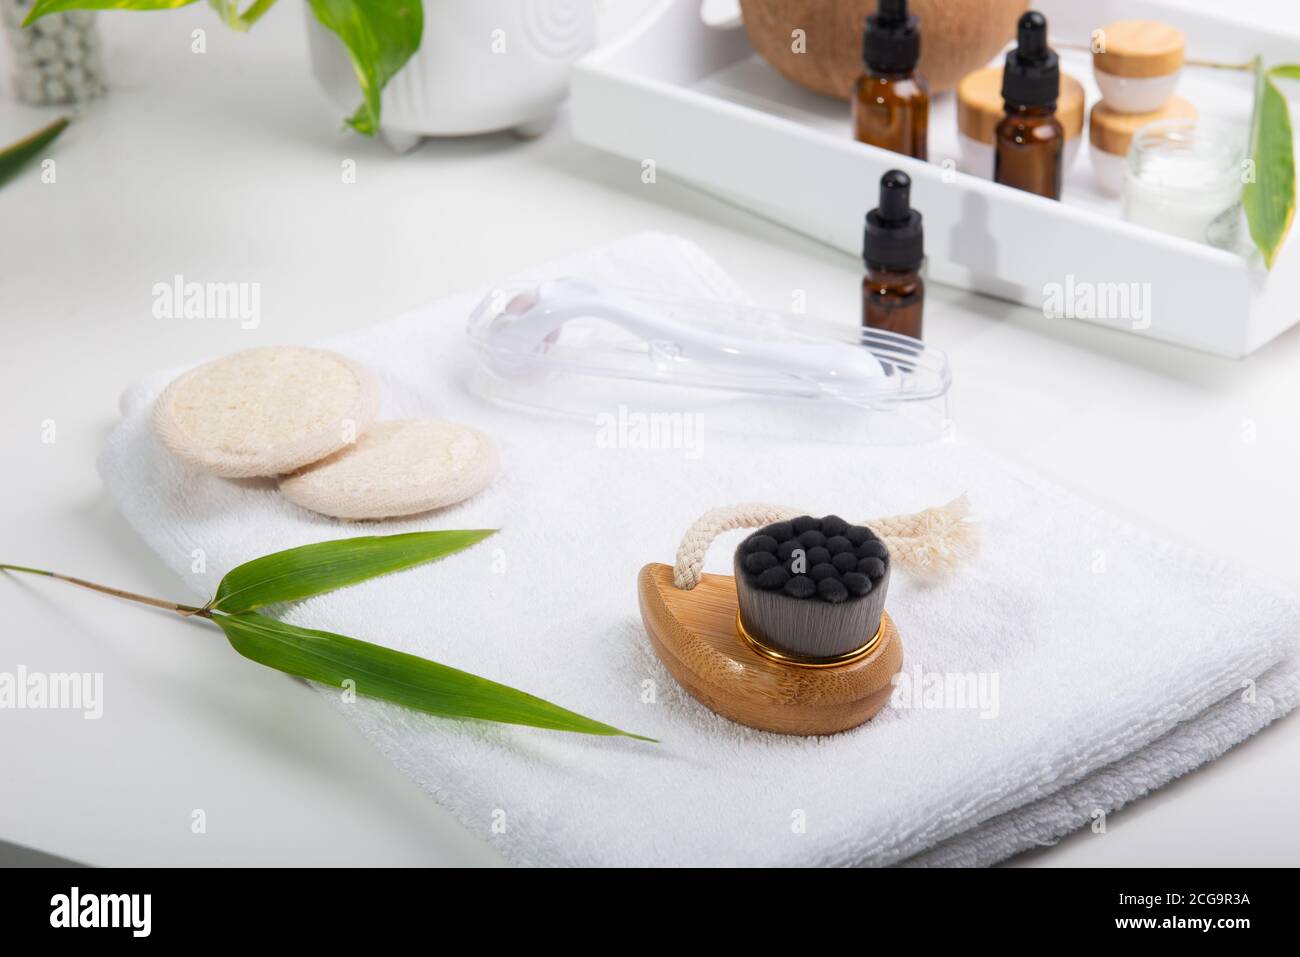 Home self care for face massage. Dry lymphatic drainage massage wooden brushe, derma mezoroller and loofah pads for skin care on a white tray. Bathroo Stock Photo